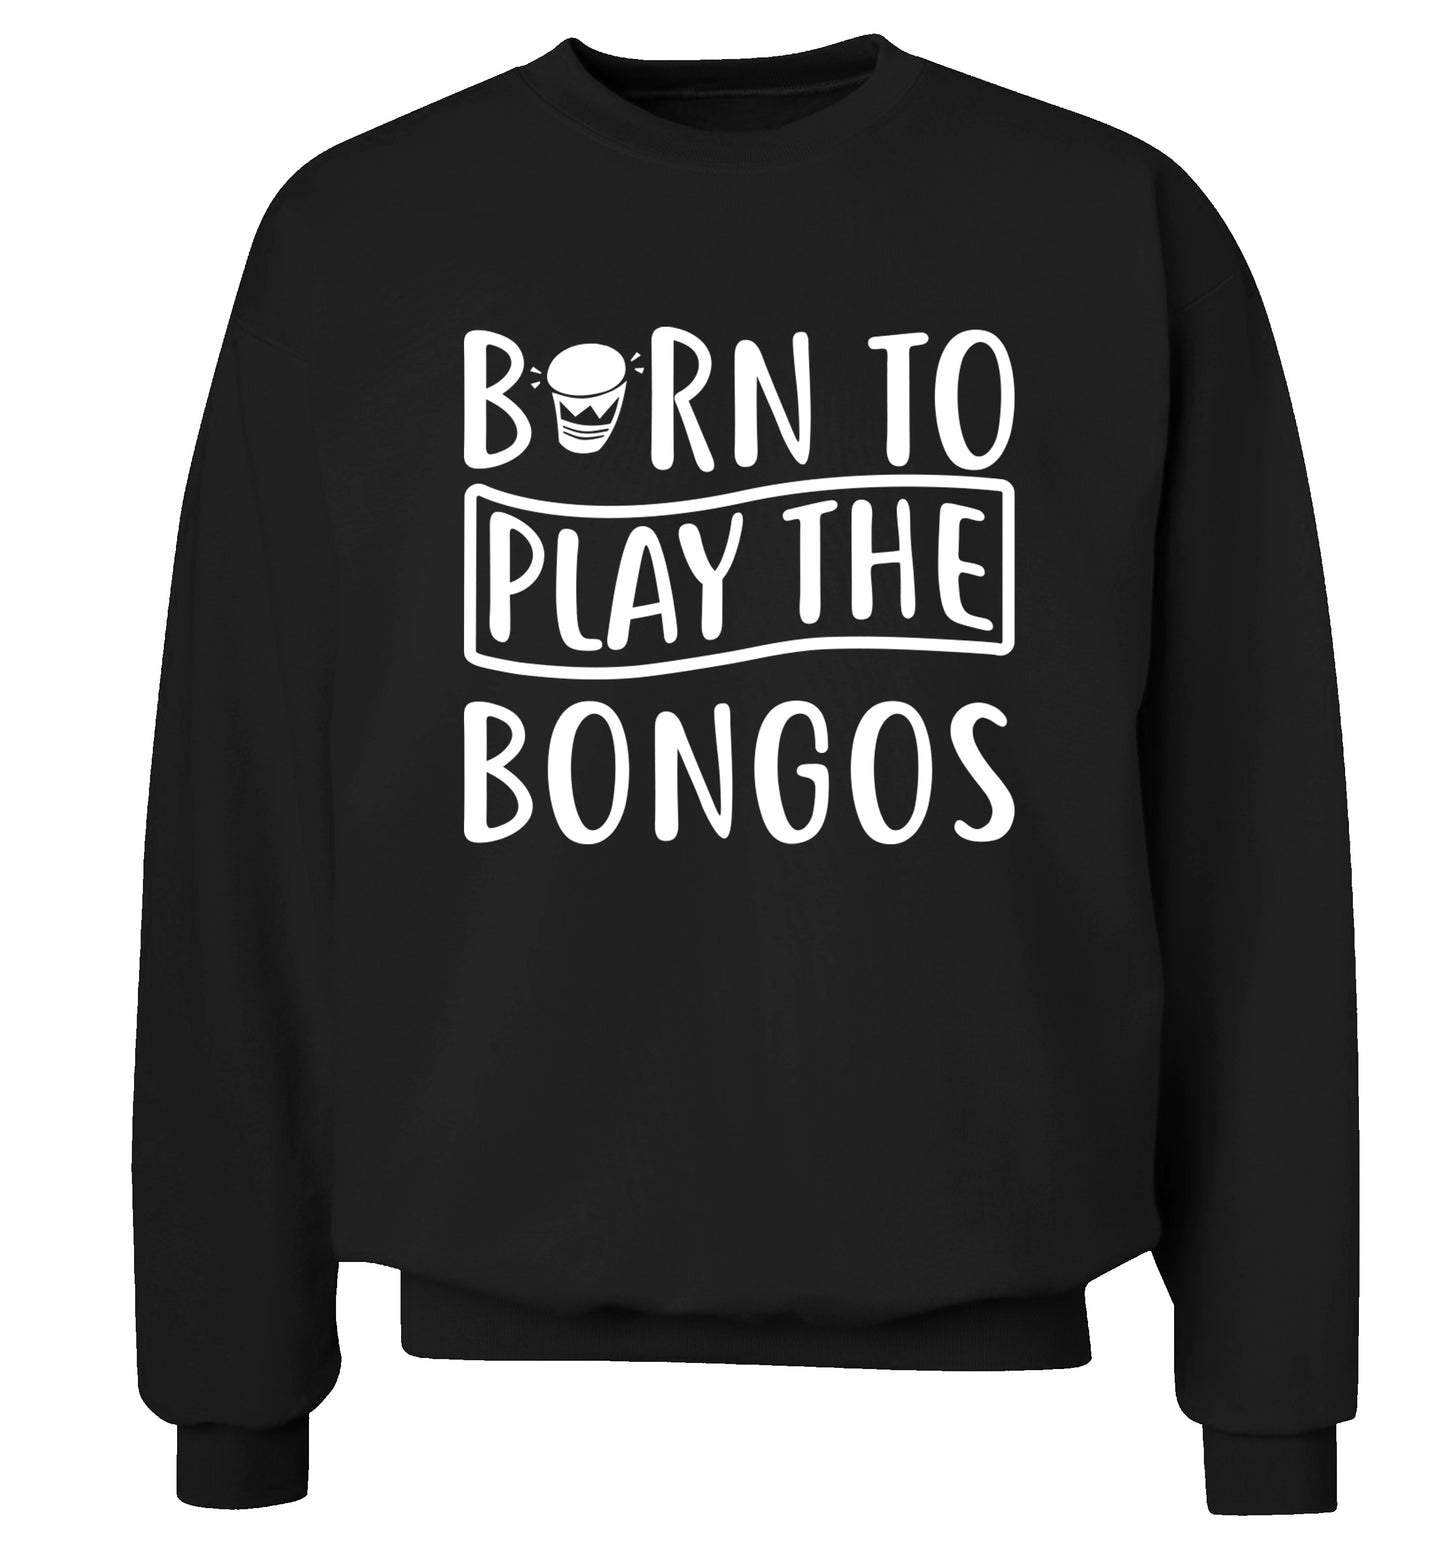 Born to play the bongos Adult's unisex black Sweater 2XL